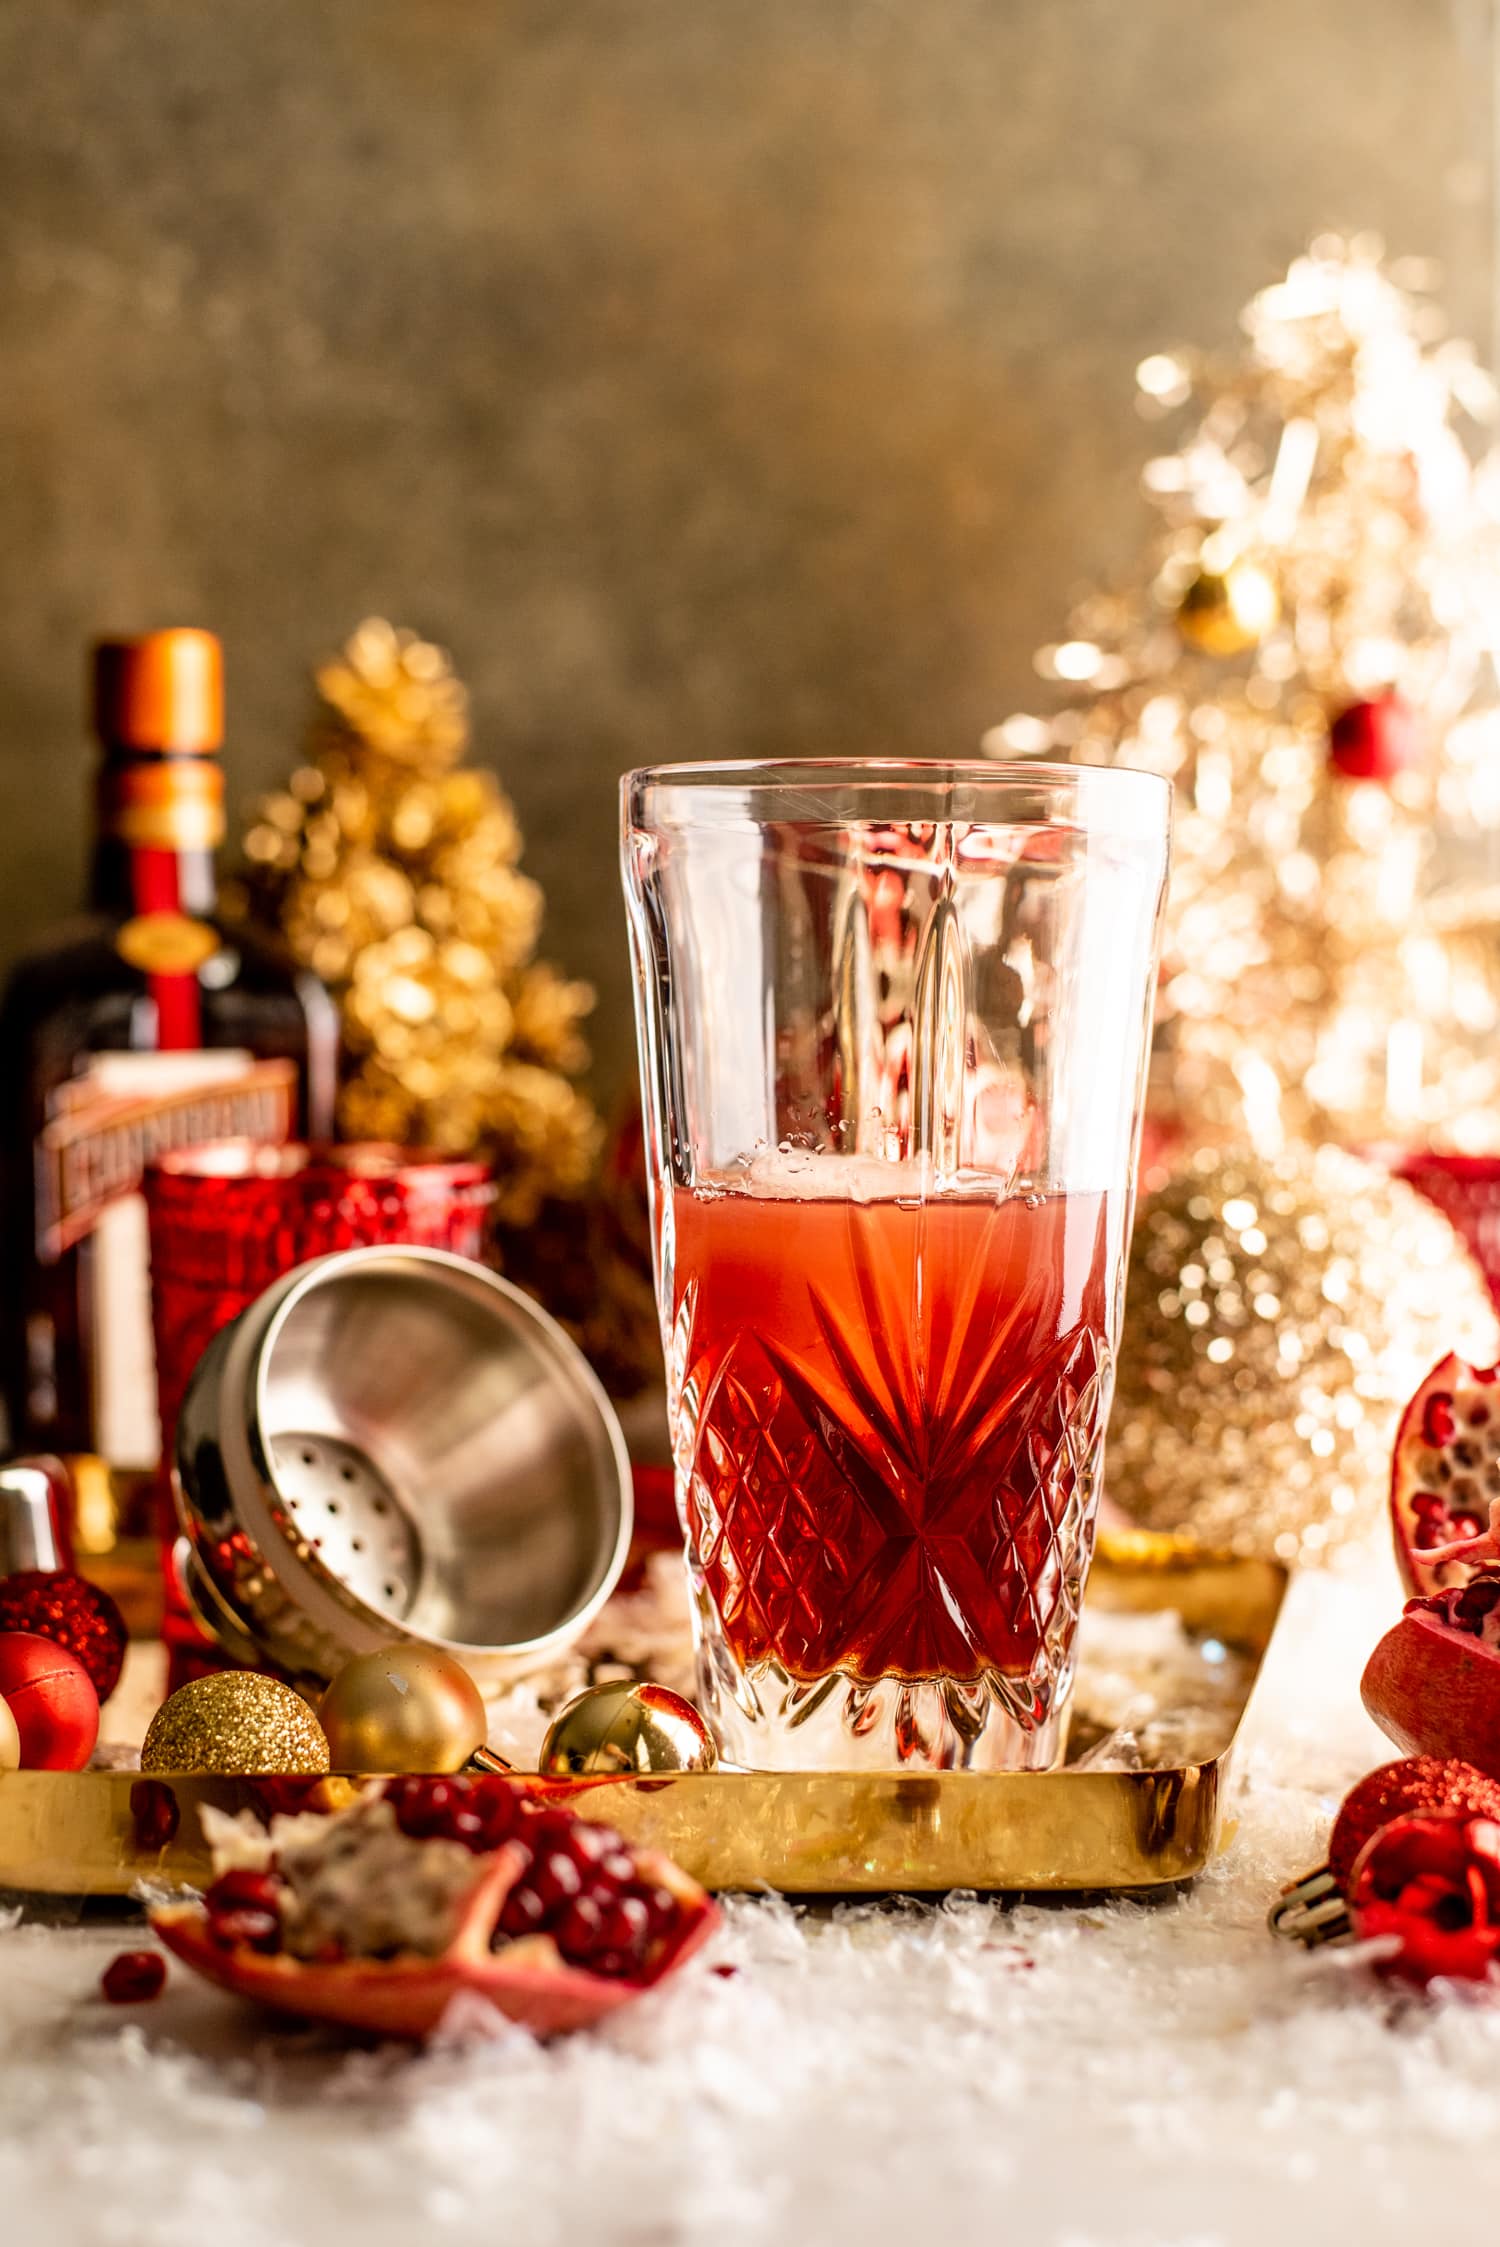 The shaken cocktail sitting on a table surrounded by ornaments.